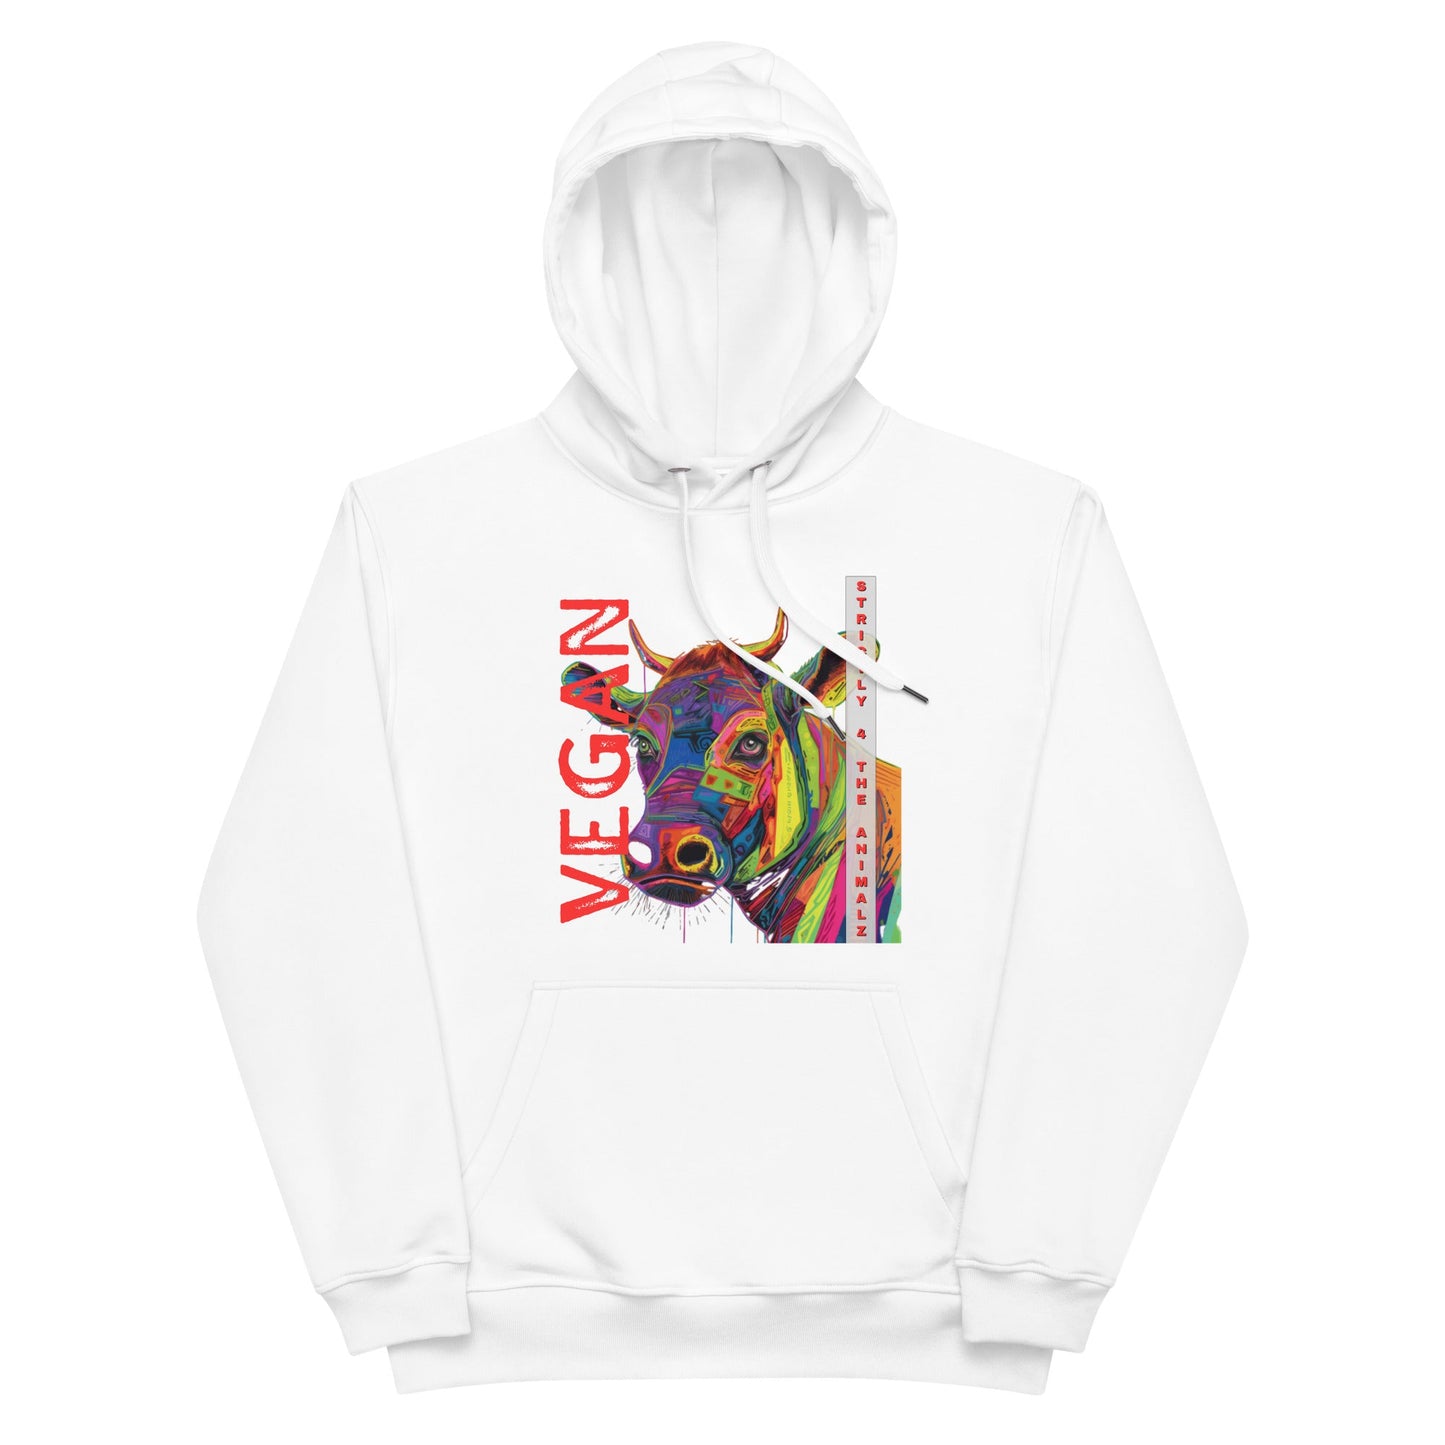 Strictly 4 the A.N.I.M.A.L.Z. Hoodie - For Health For Ethics - White